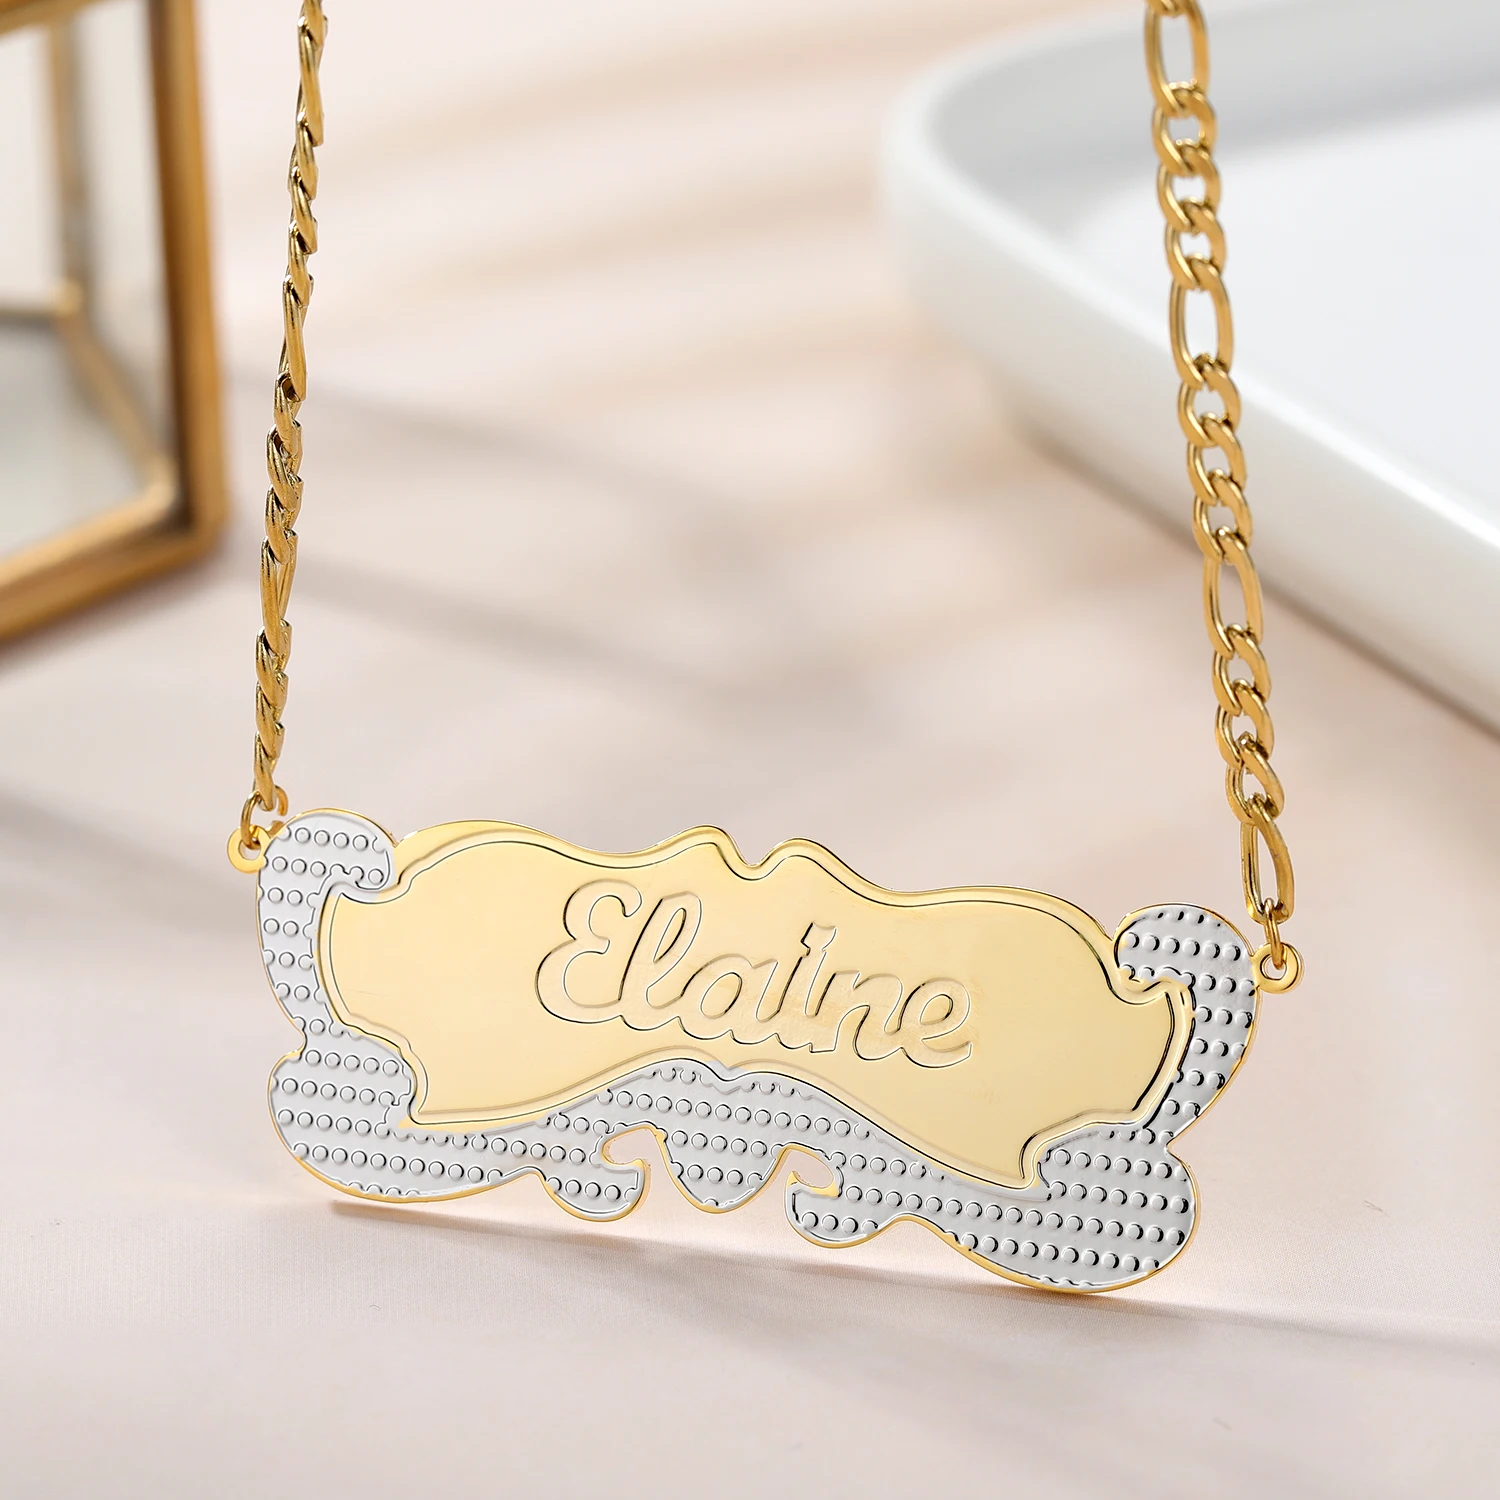 Double Gold Plated Name Necklace Laser Engraved Nameplate Pendant With Beading Stainless Steel Jewelry Gift For Women hunst co2 laser si reflective mirrors for laser engraver gold plated silicon reflector lenses dia 20 25 30mm